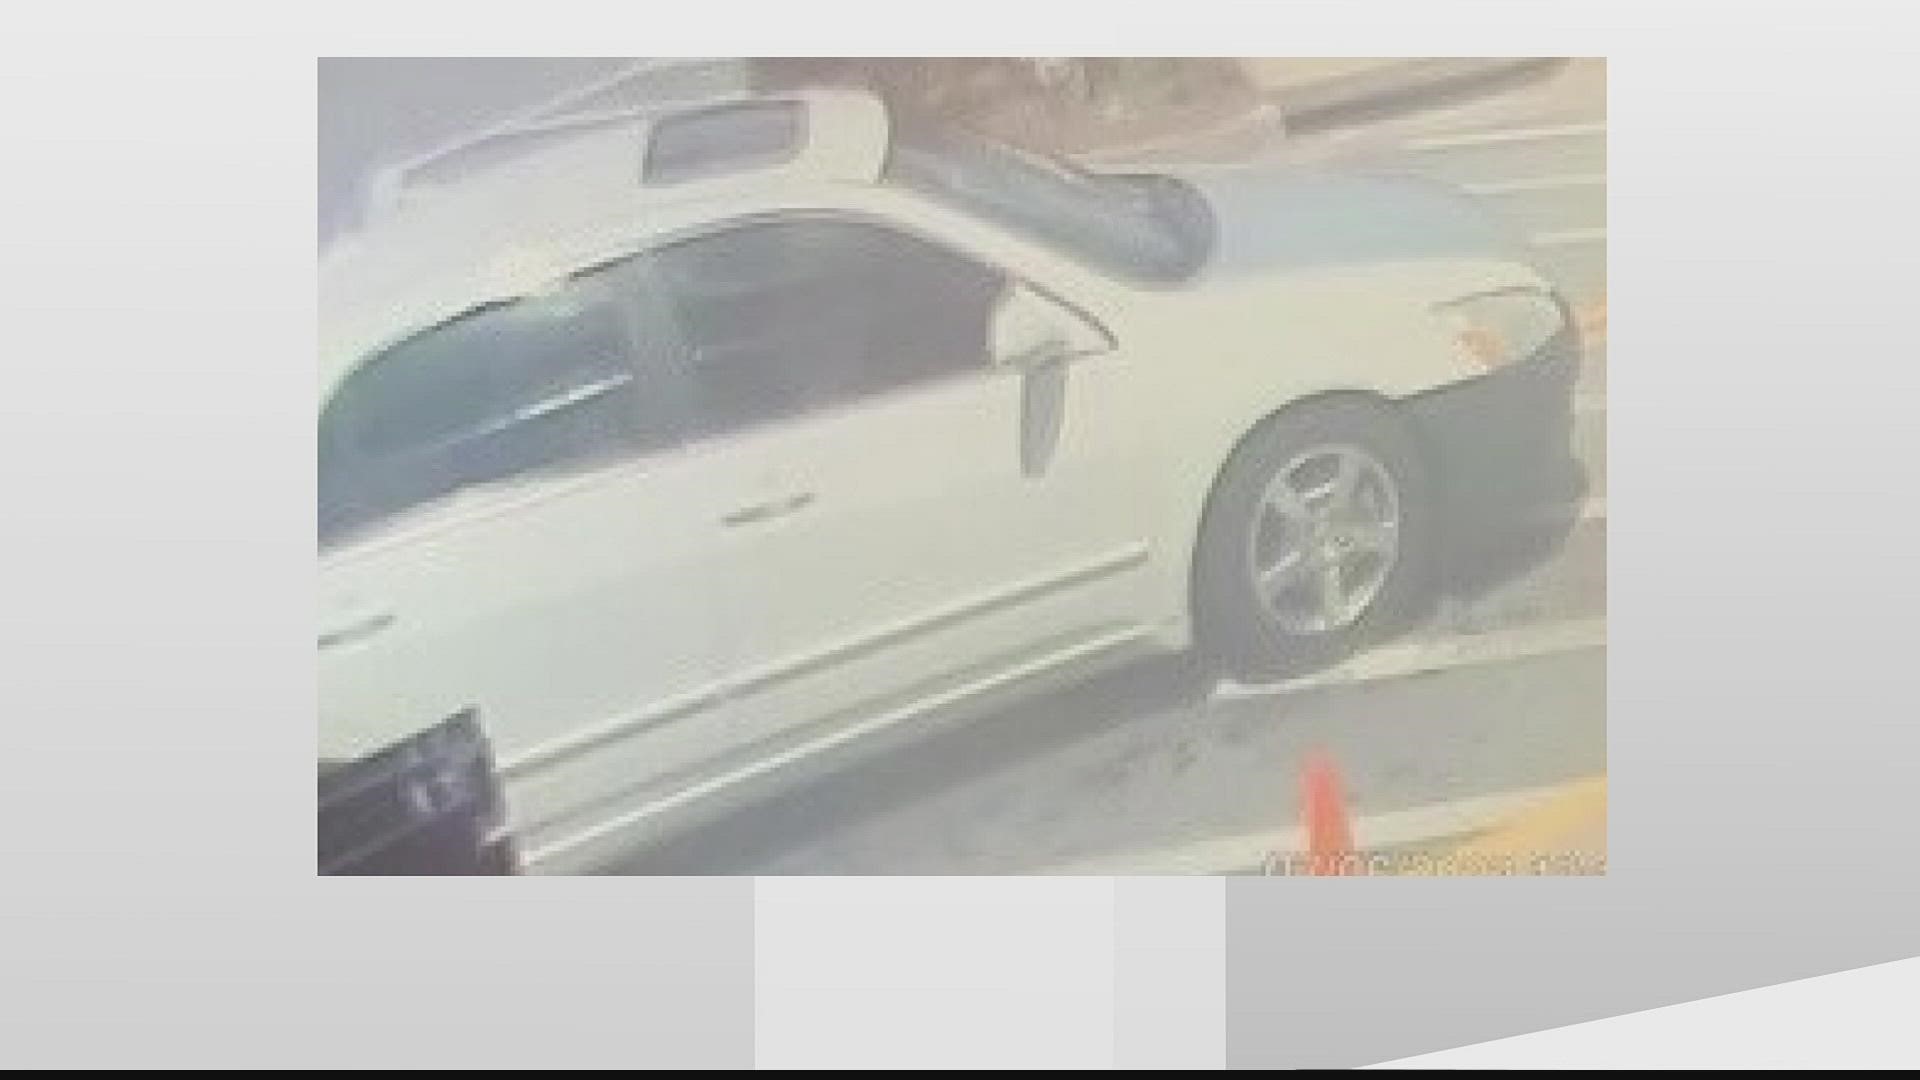 The car is a white Honda sedan with a back front bumper, a gray hood and a sunroof, according to the department.